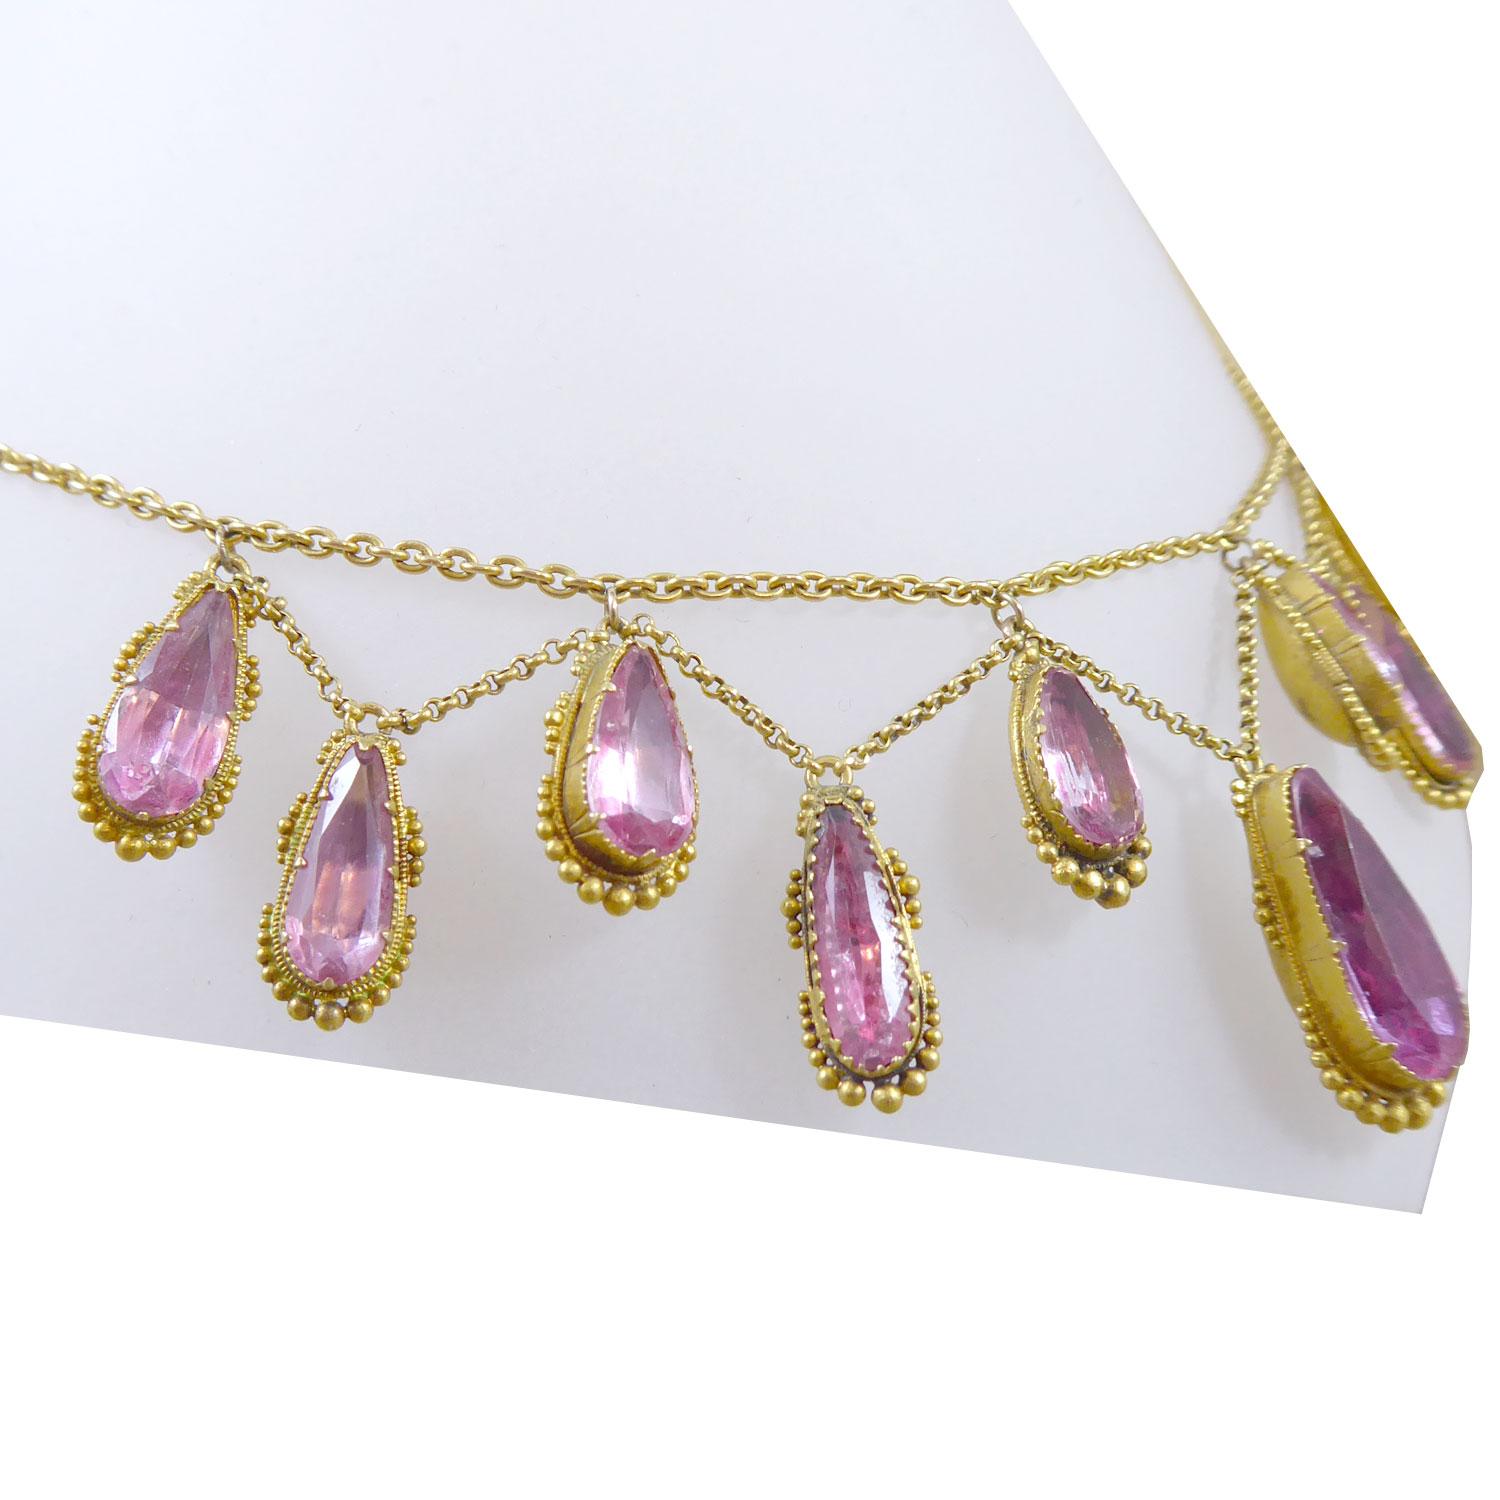 A delightful antique necklace created circa 1850 and comprising a fringe of pear shaped, foil-backed pink topaz in claw settings with granulatiion detailed border.  The topaz, 11 in total, suspend from yellow trace chain in a garland/swag design